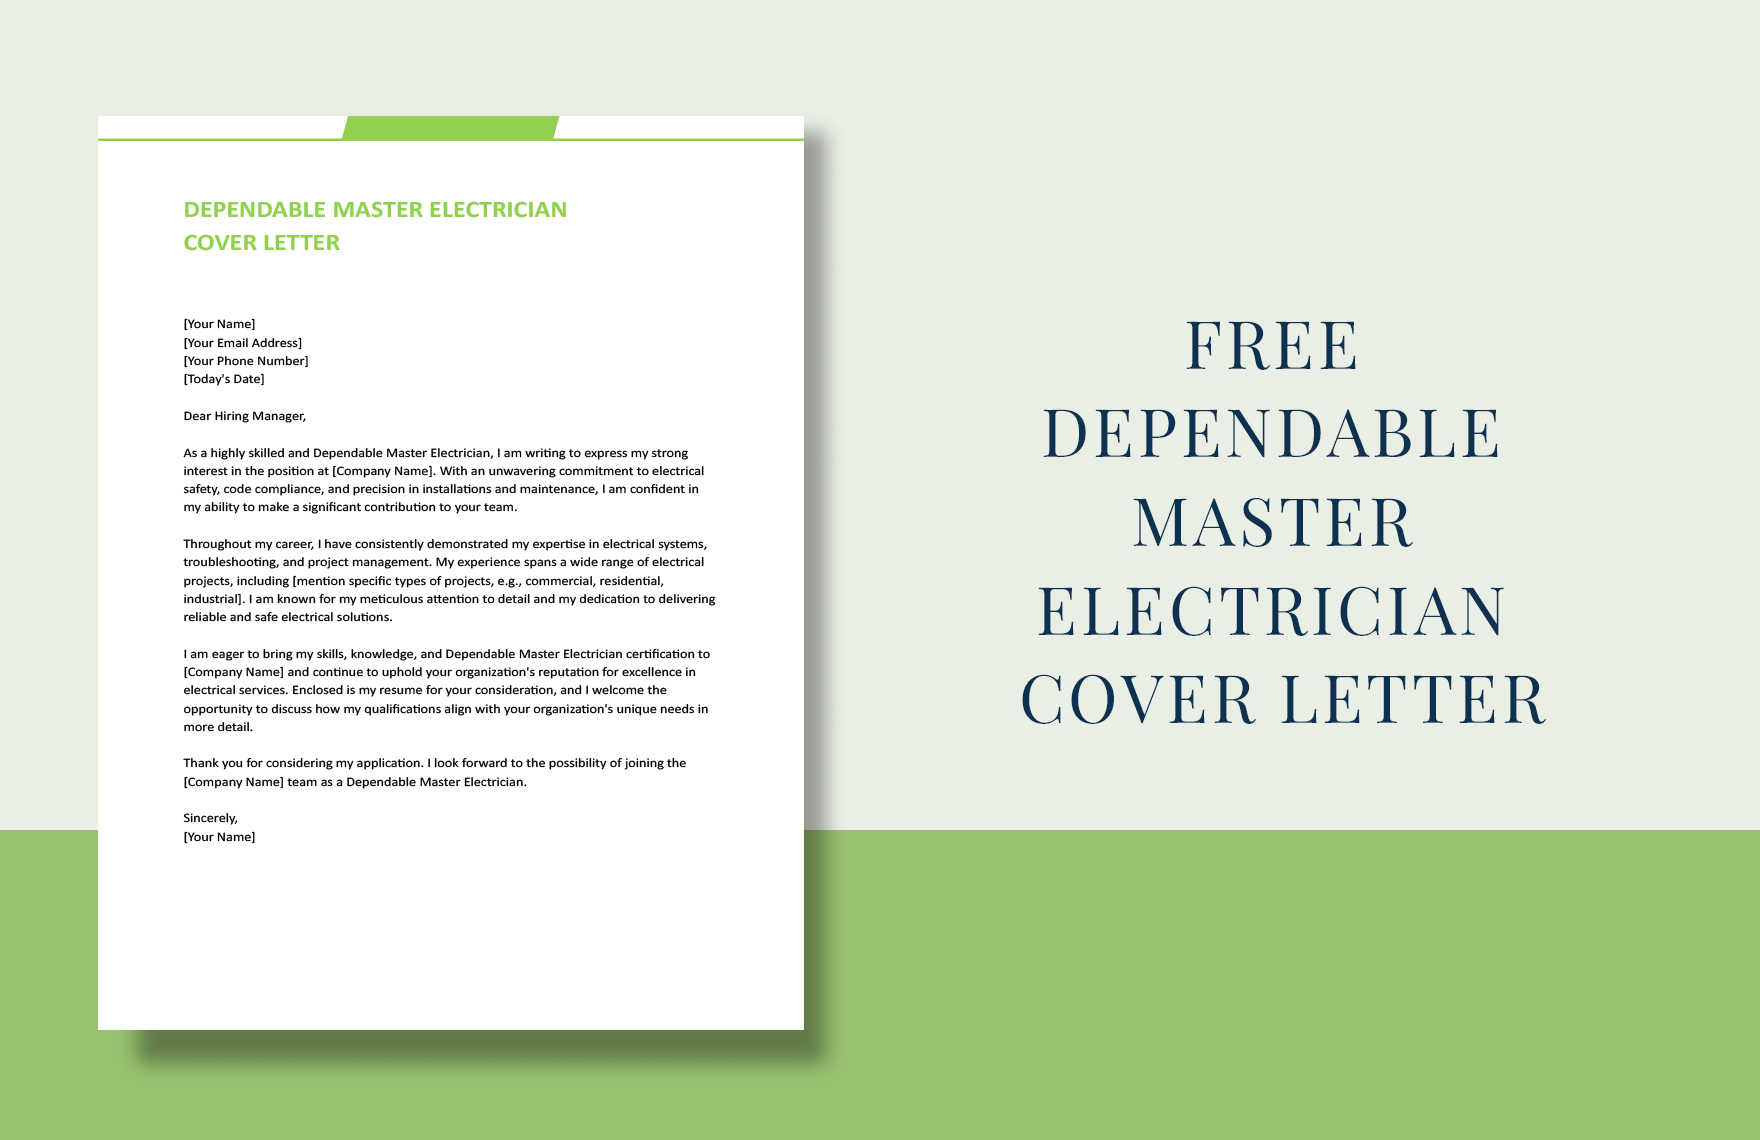 Dependable Master Electrician Cover Letter